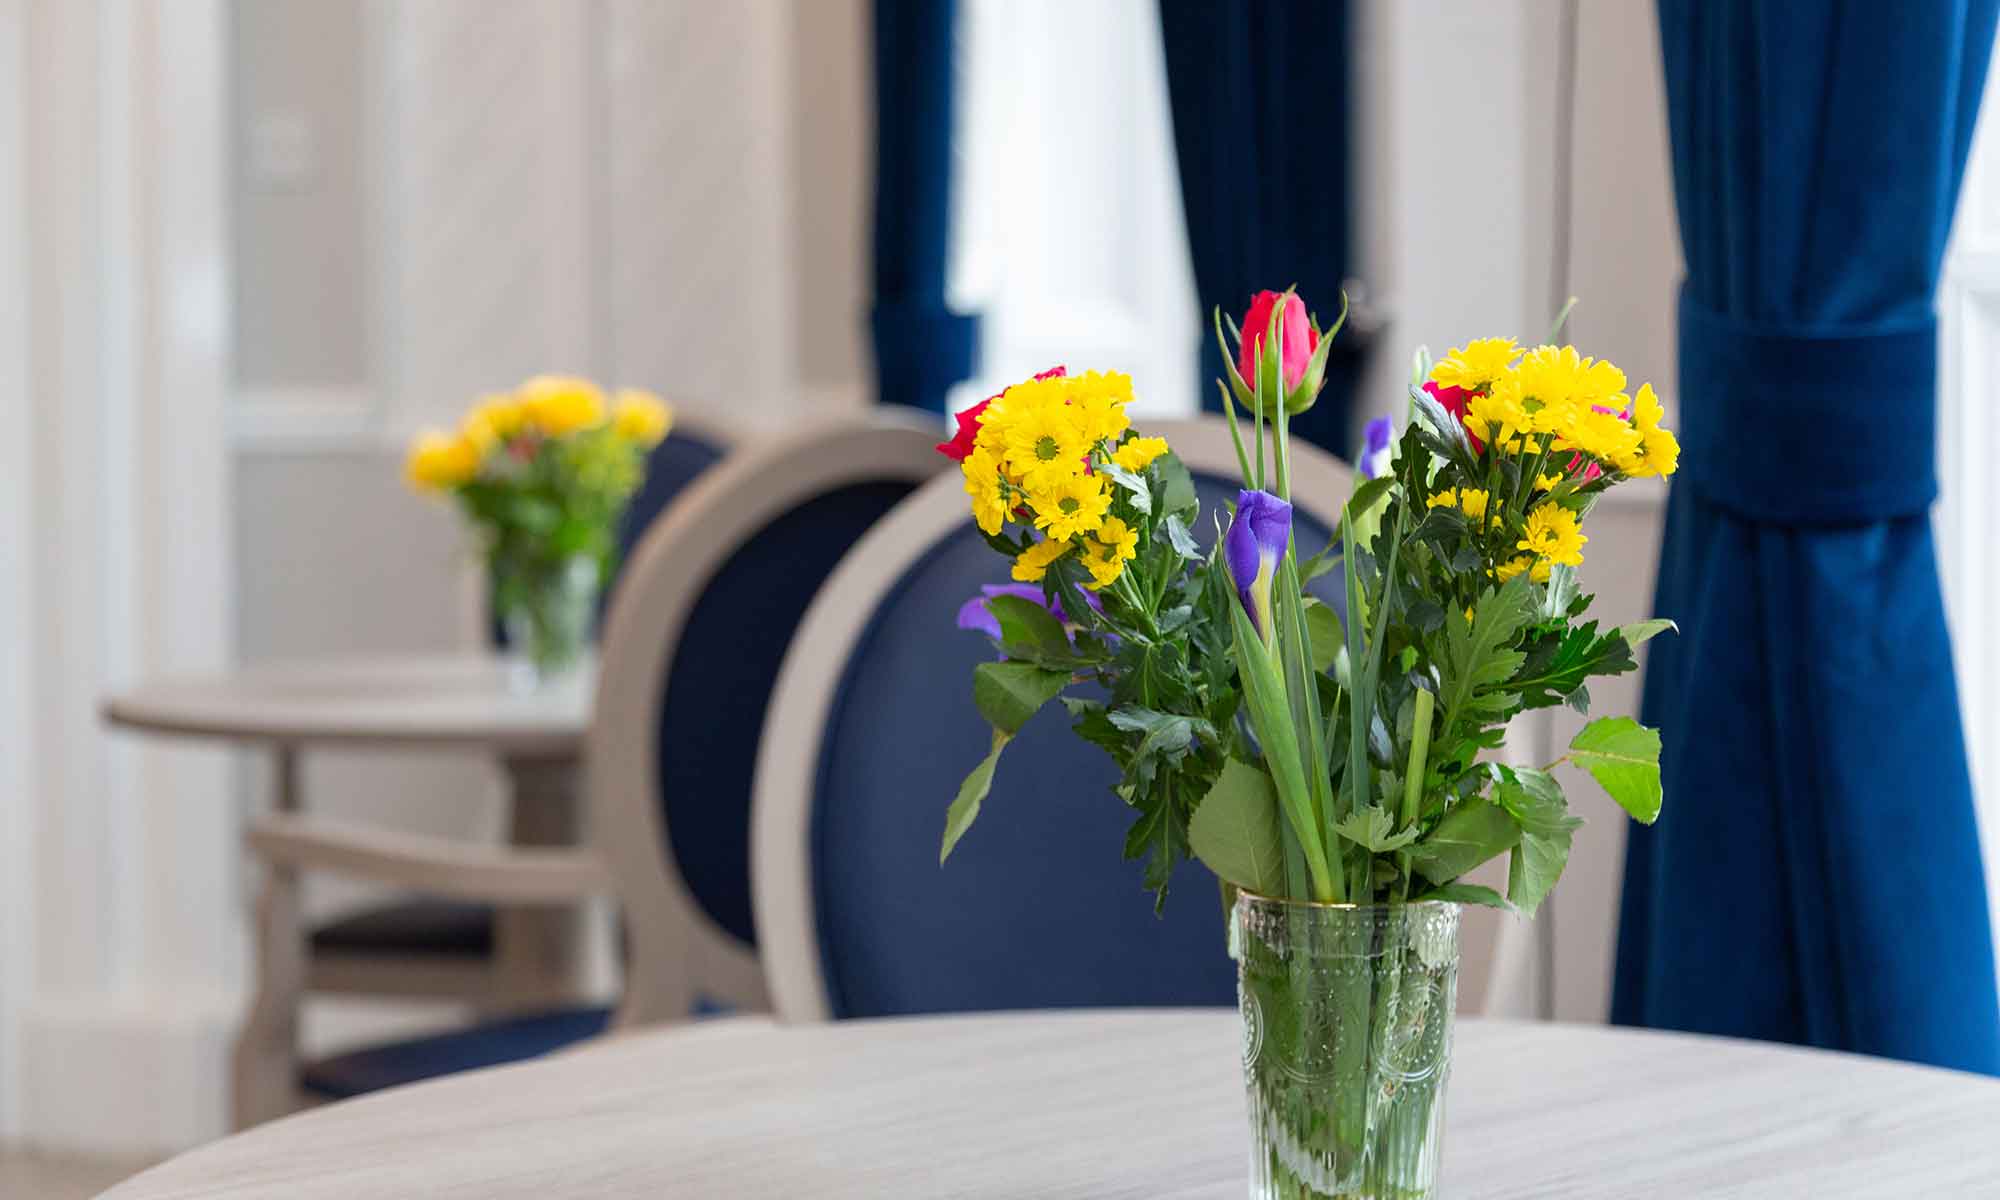 Dining area at Newton House Care Home. Shackletons Stamford Dining Table with Westbourne dining chairs wit a vase of flowers on table top.